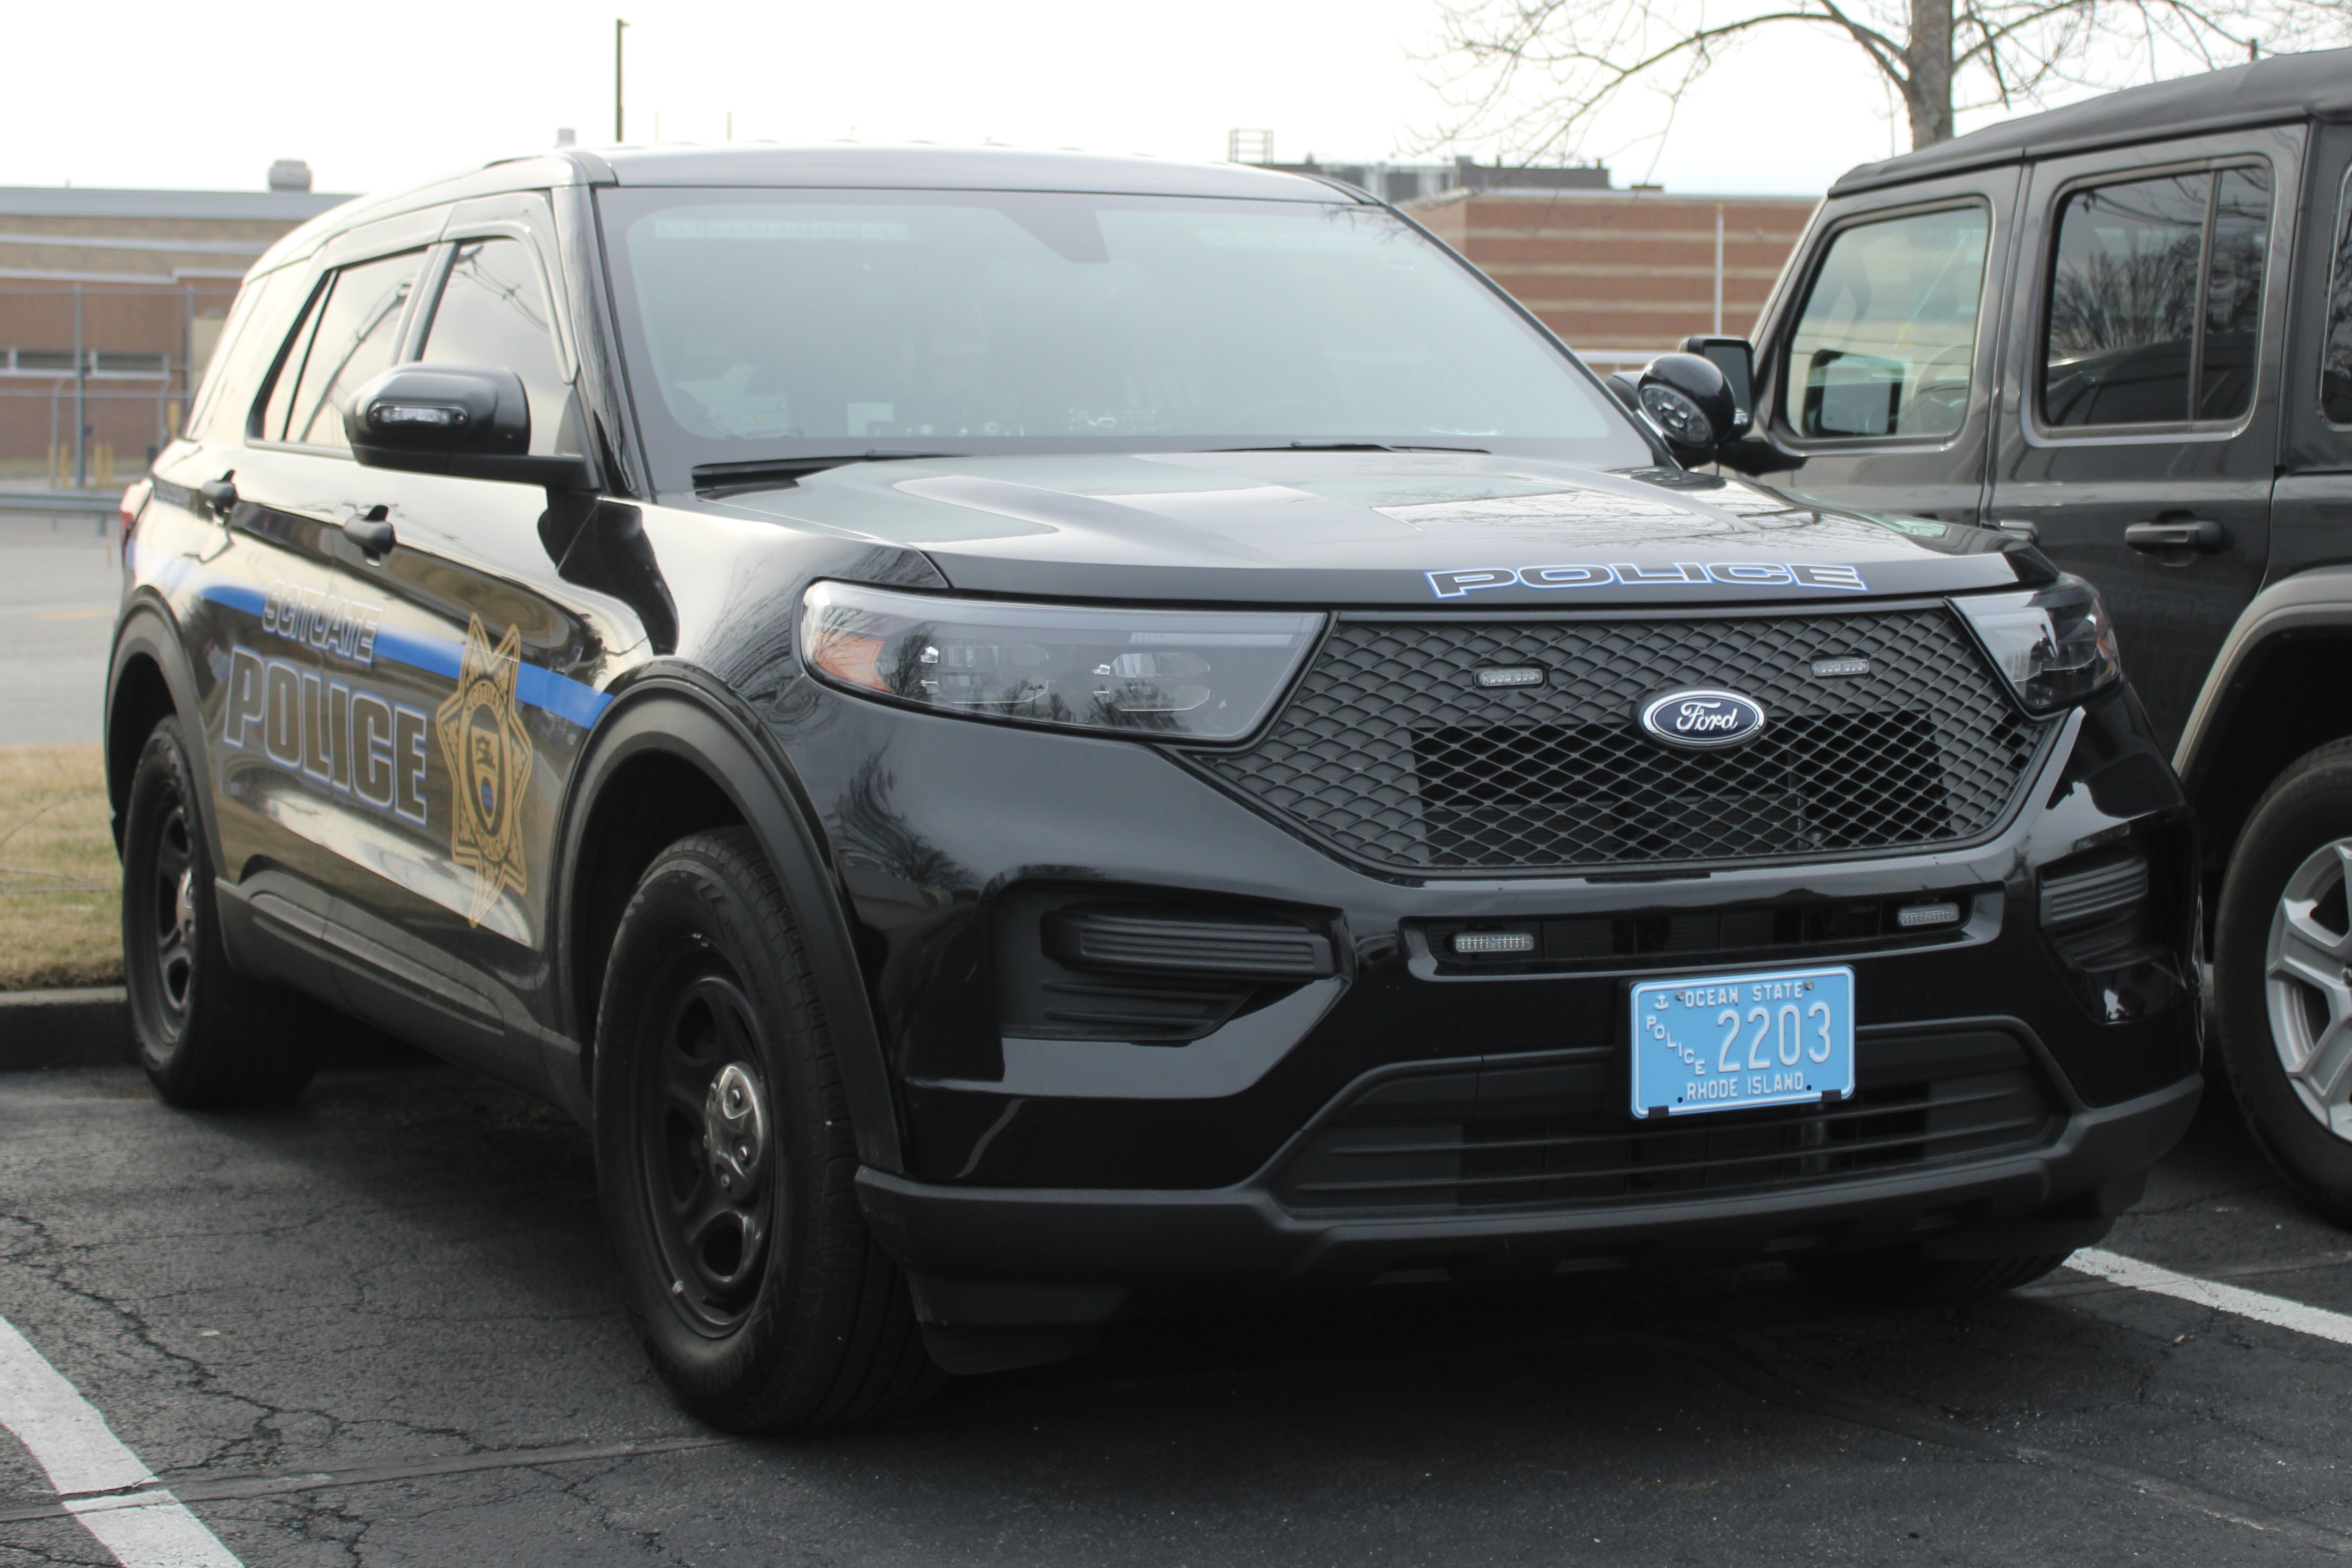 A photo  of Scituate Police
            Cruiser 2203, a 2022 Ford Police Interceptor Utility             taken by @riemergencyvehicles